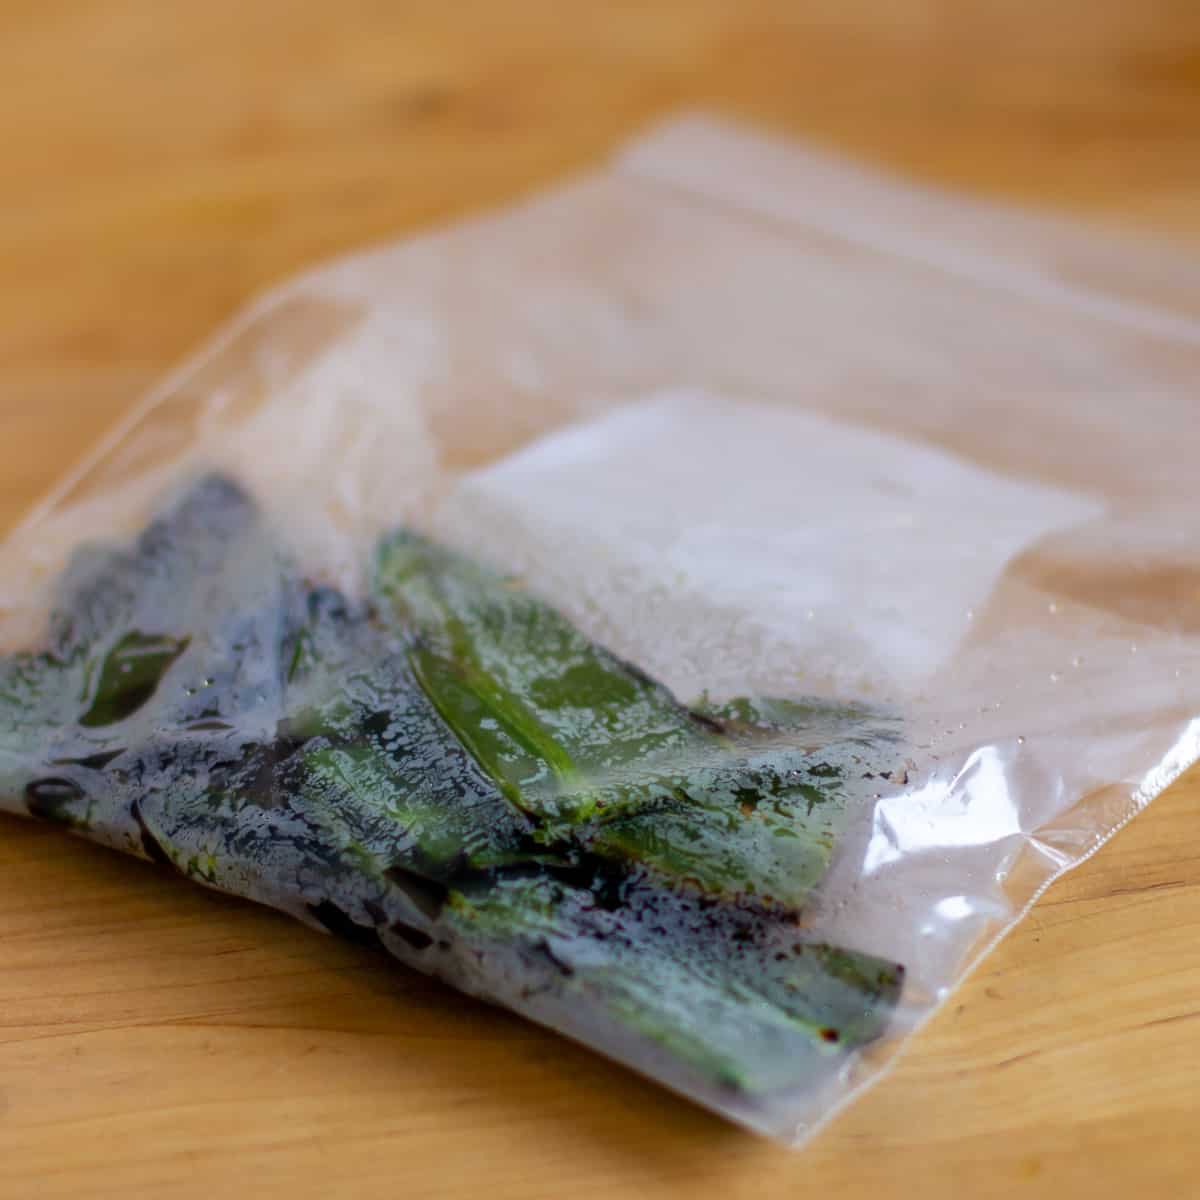 Roasted peppers in a freezer bag that is showing steam and moisture on the plastic bag.